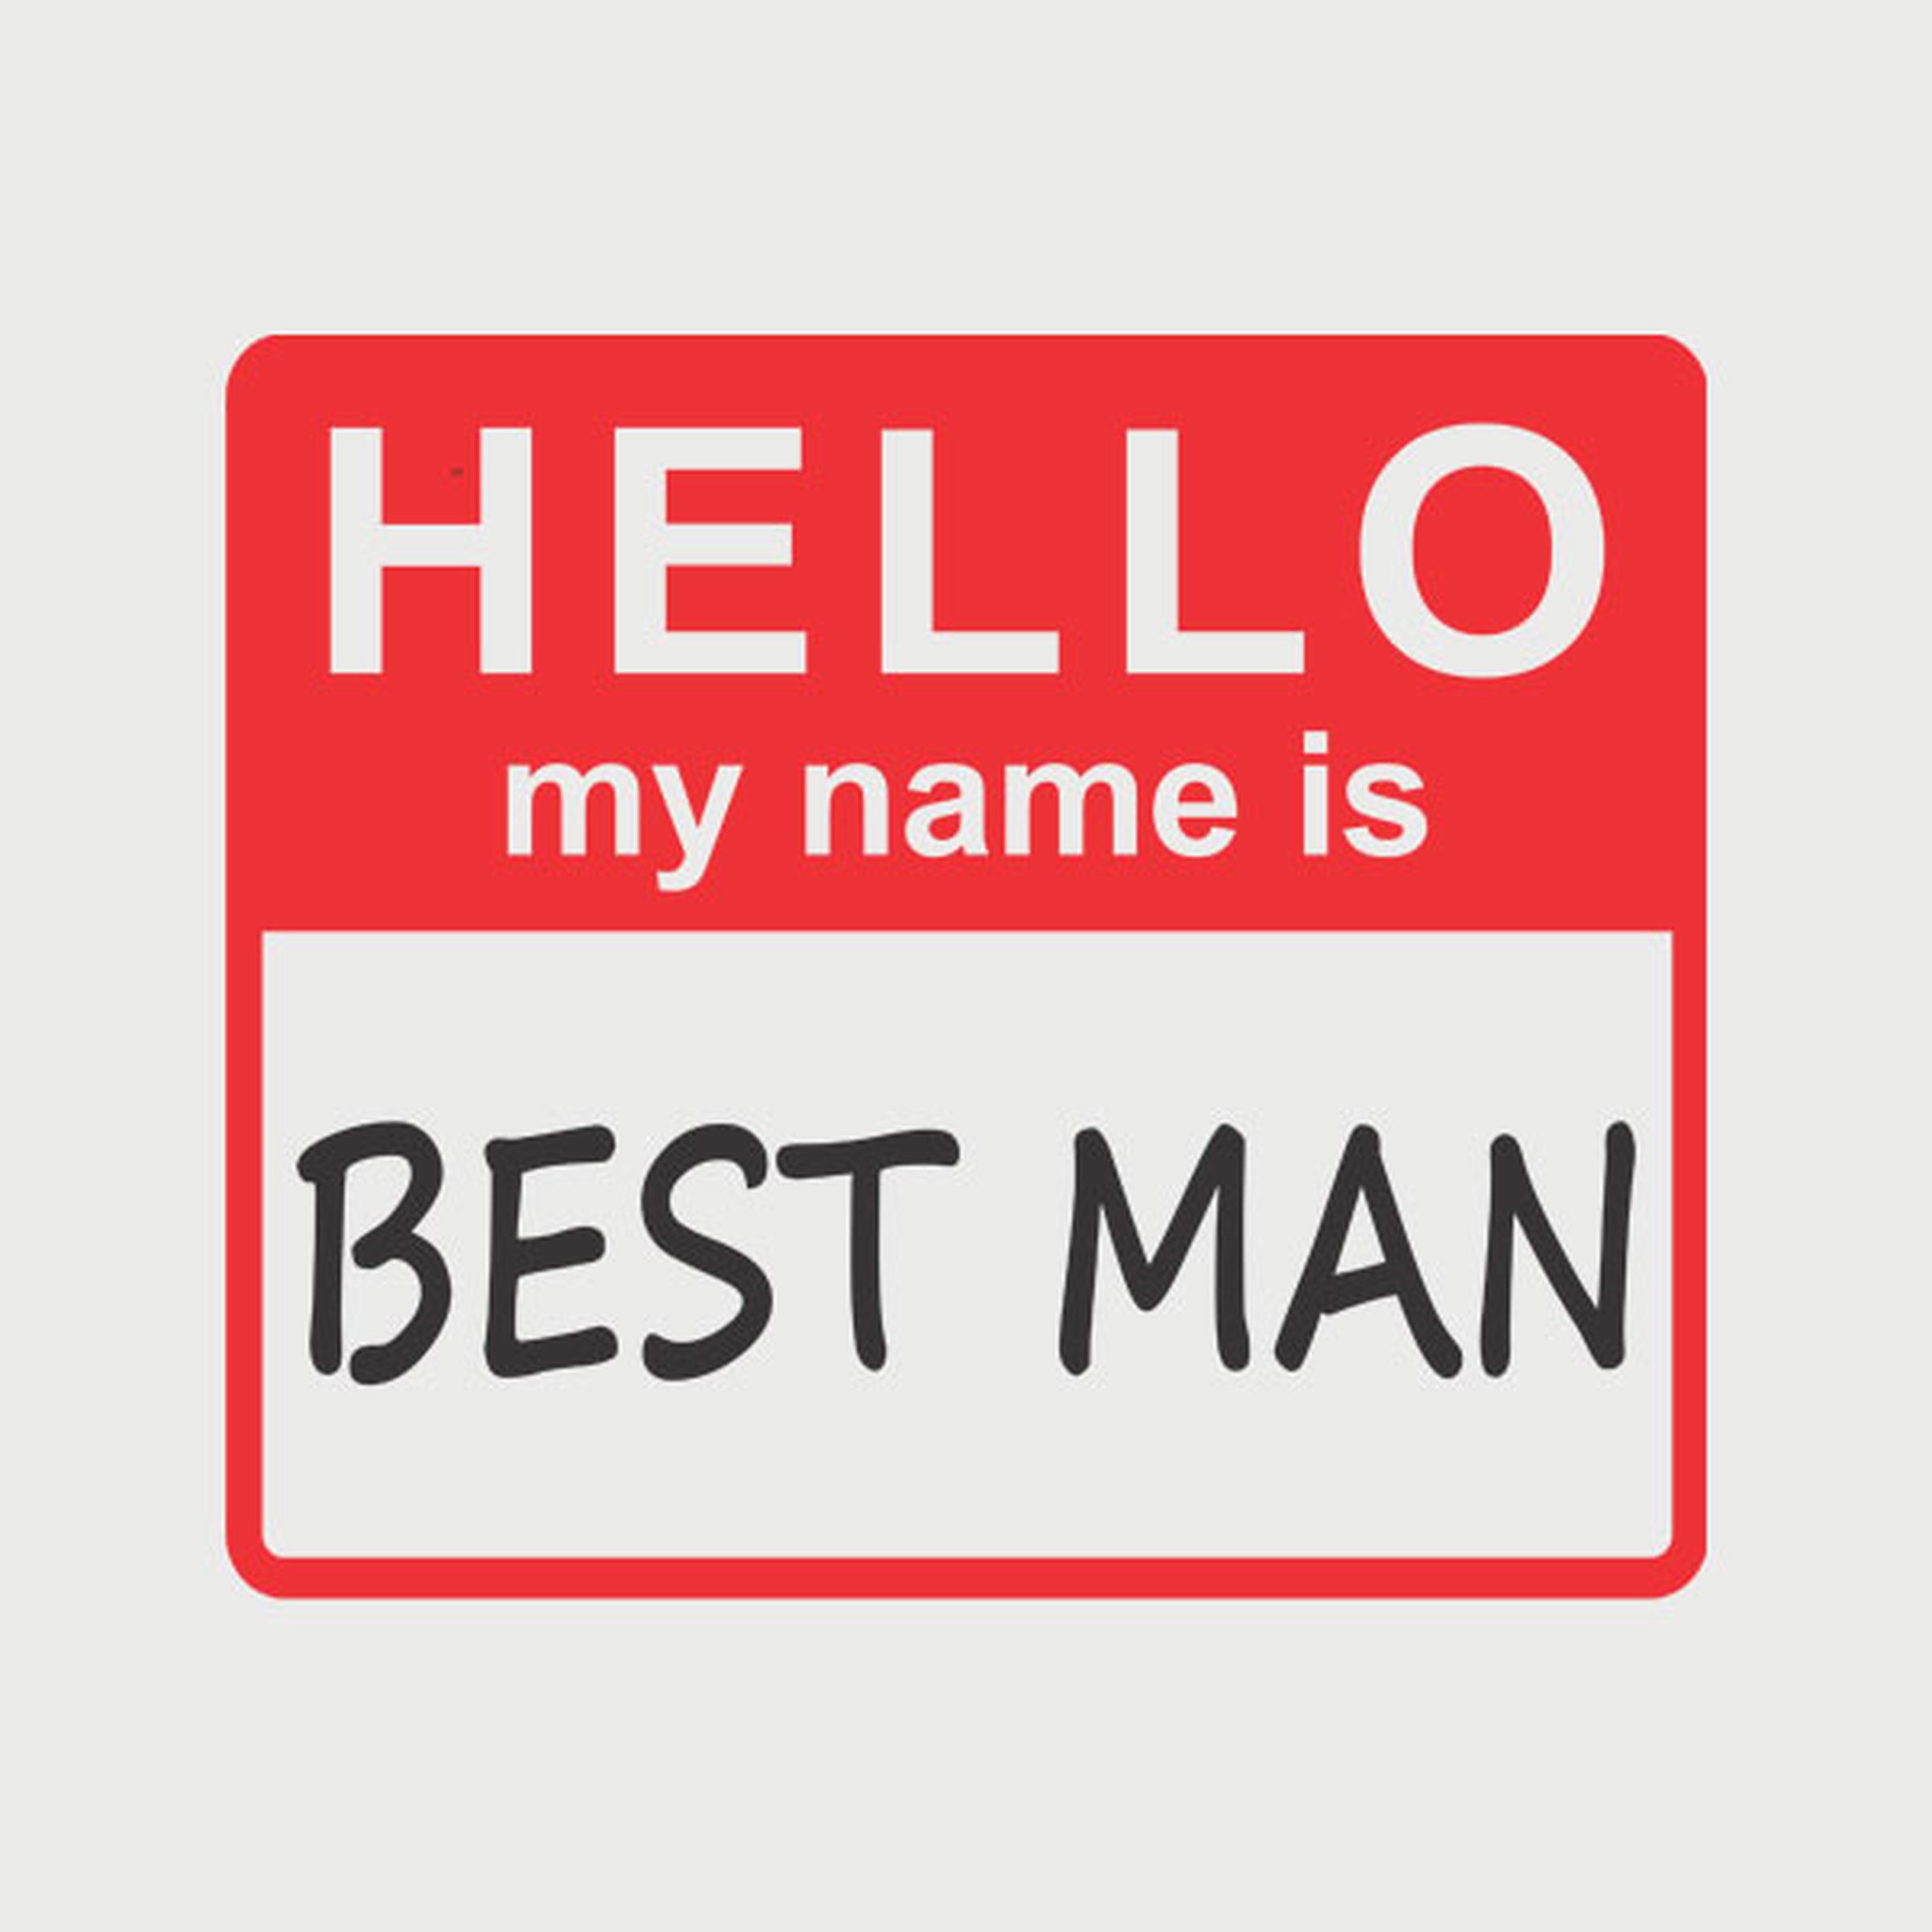 HELLO - My name is best man